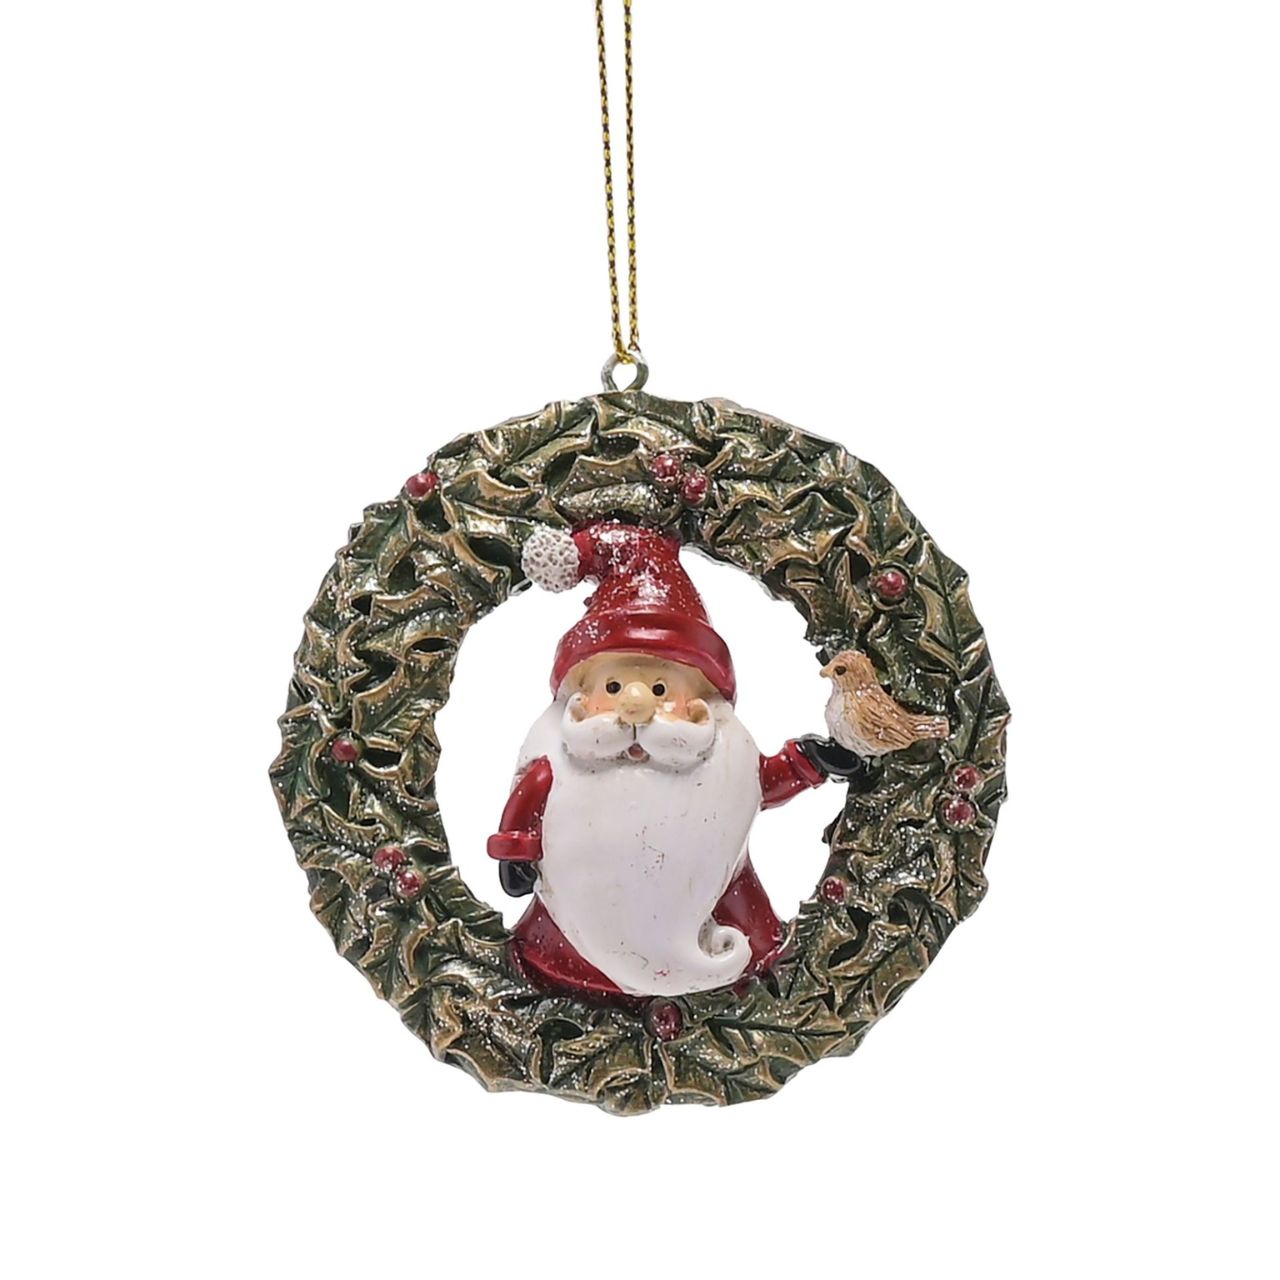 Santa in Wreath Christmas Decoration  A Santa in wreath Christmas decoration.  This standout decoration takes centre stage when displayed on the Christmas tree.